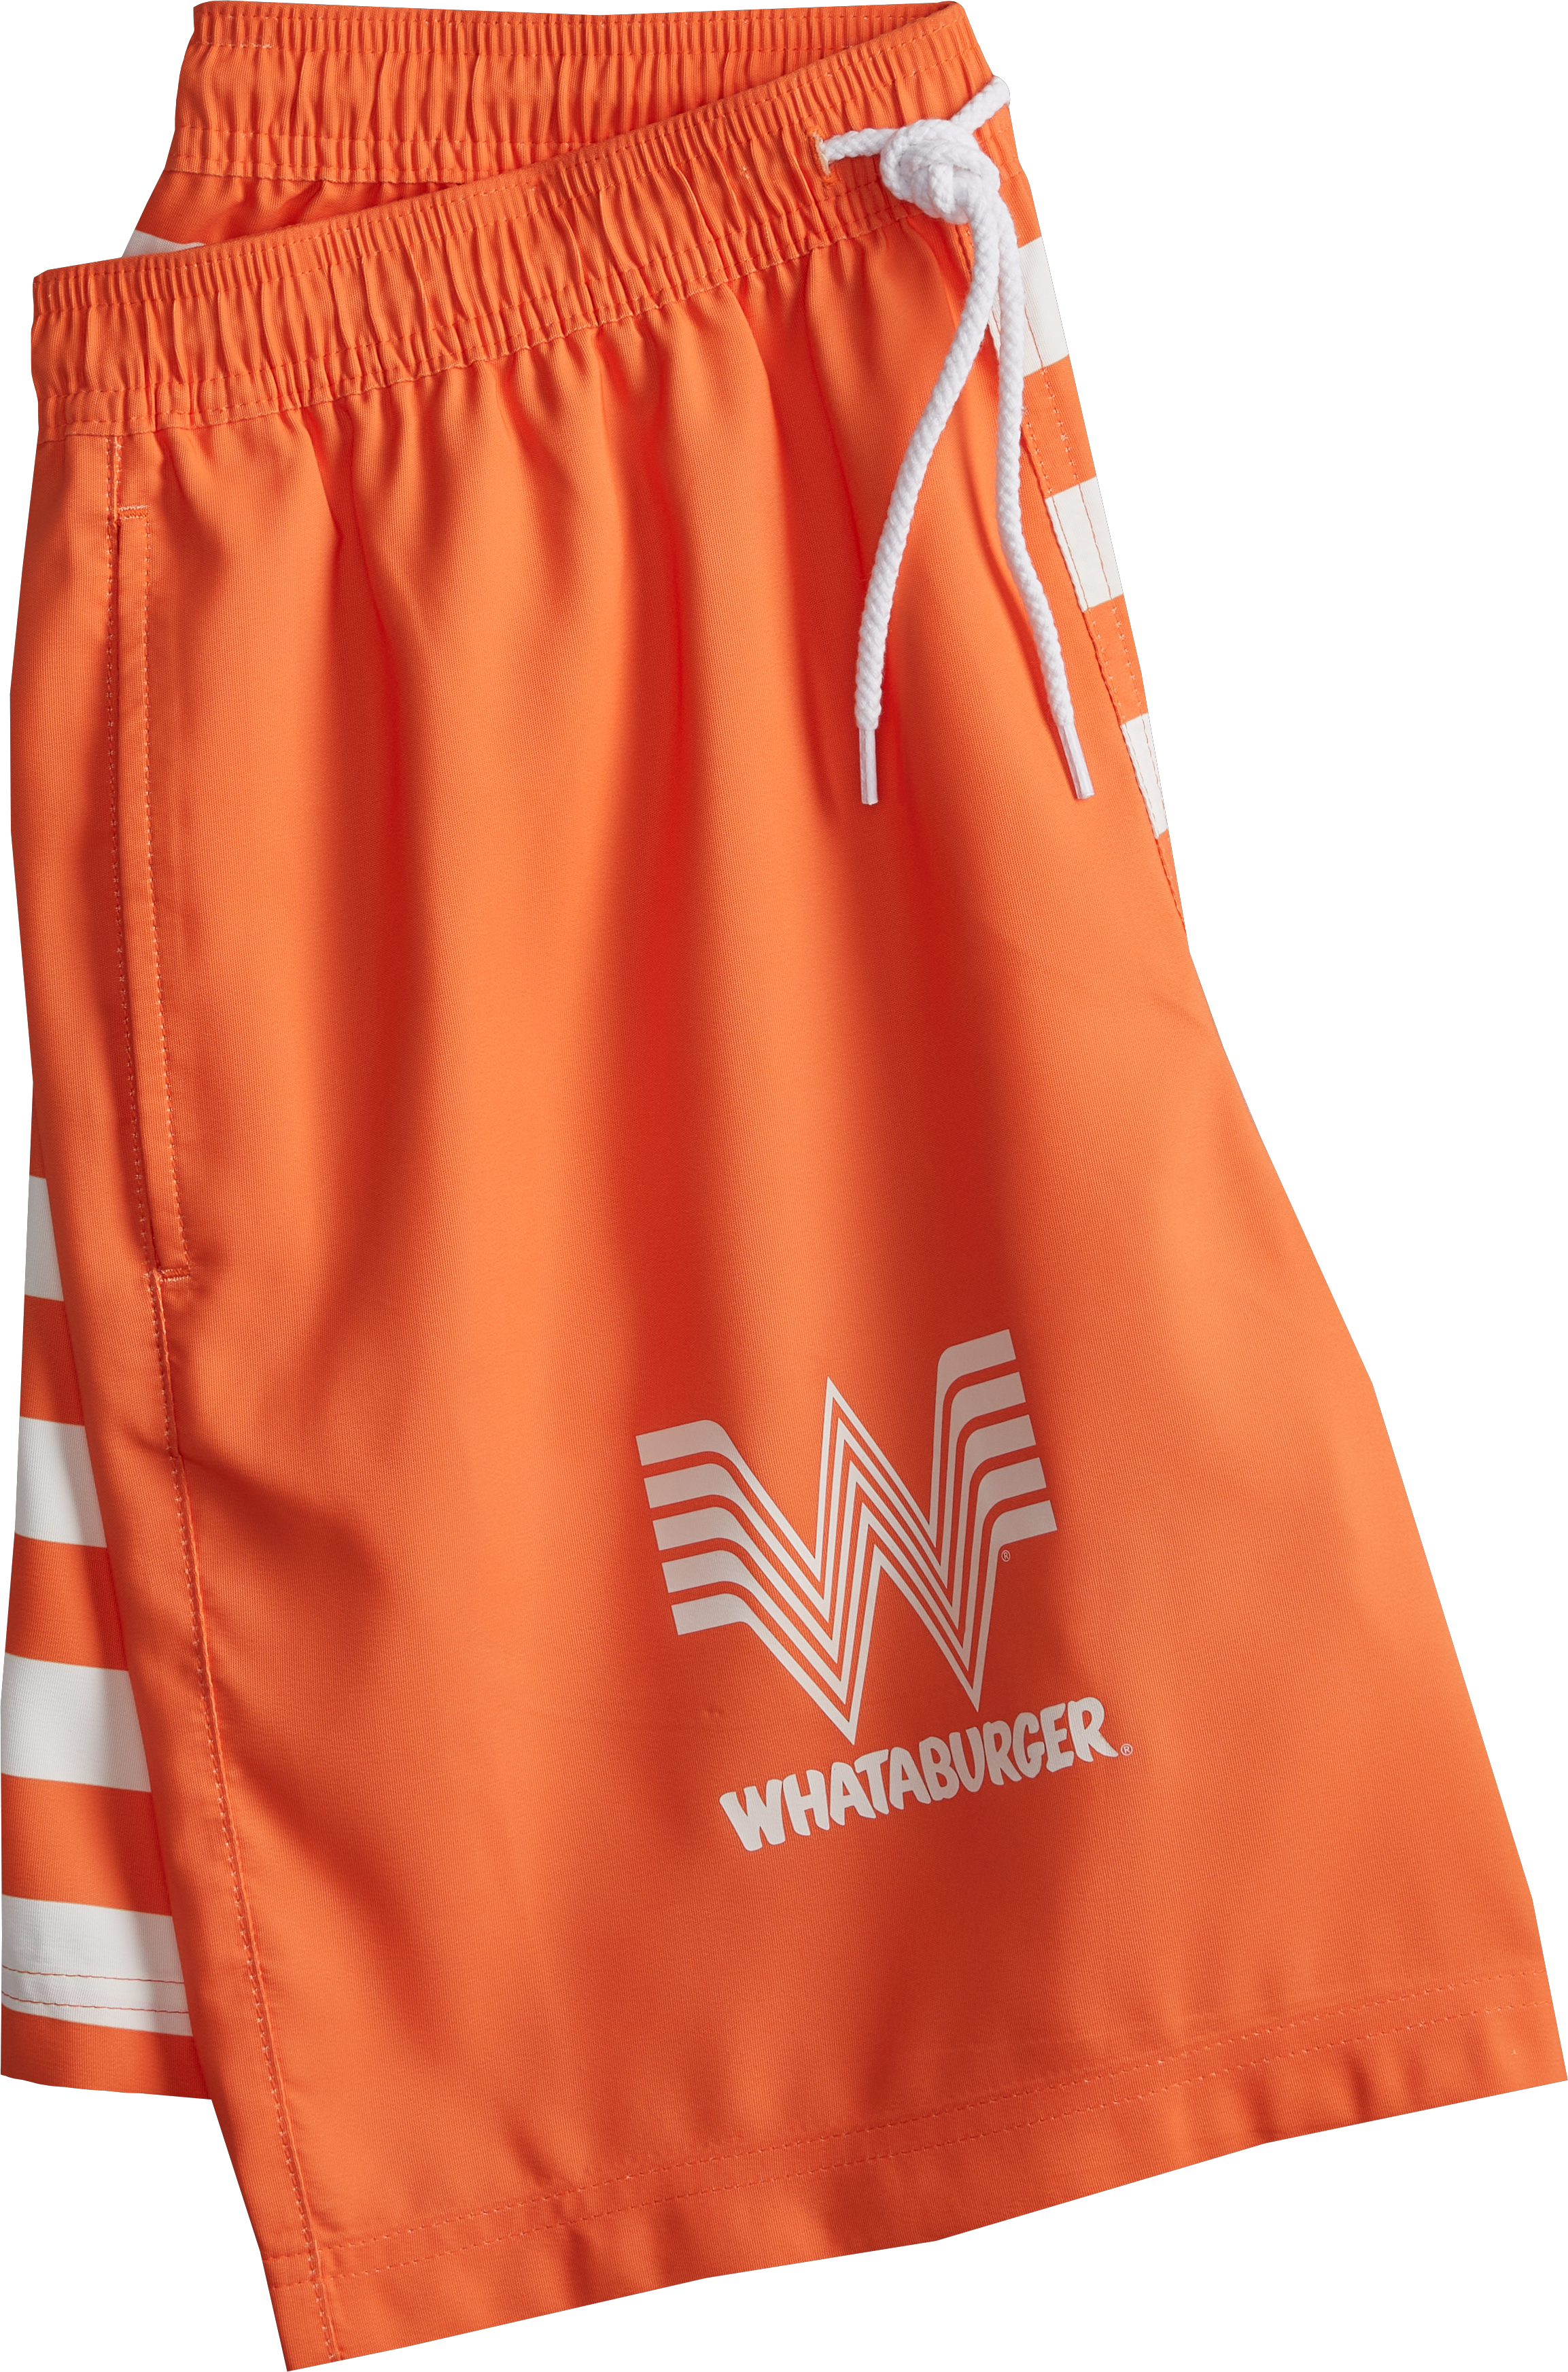 Whataburger and Academy Sports + Outdoors serve up some cool apparel ahead  of hot summer months